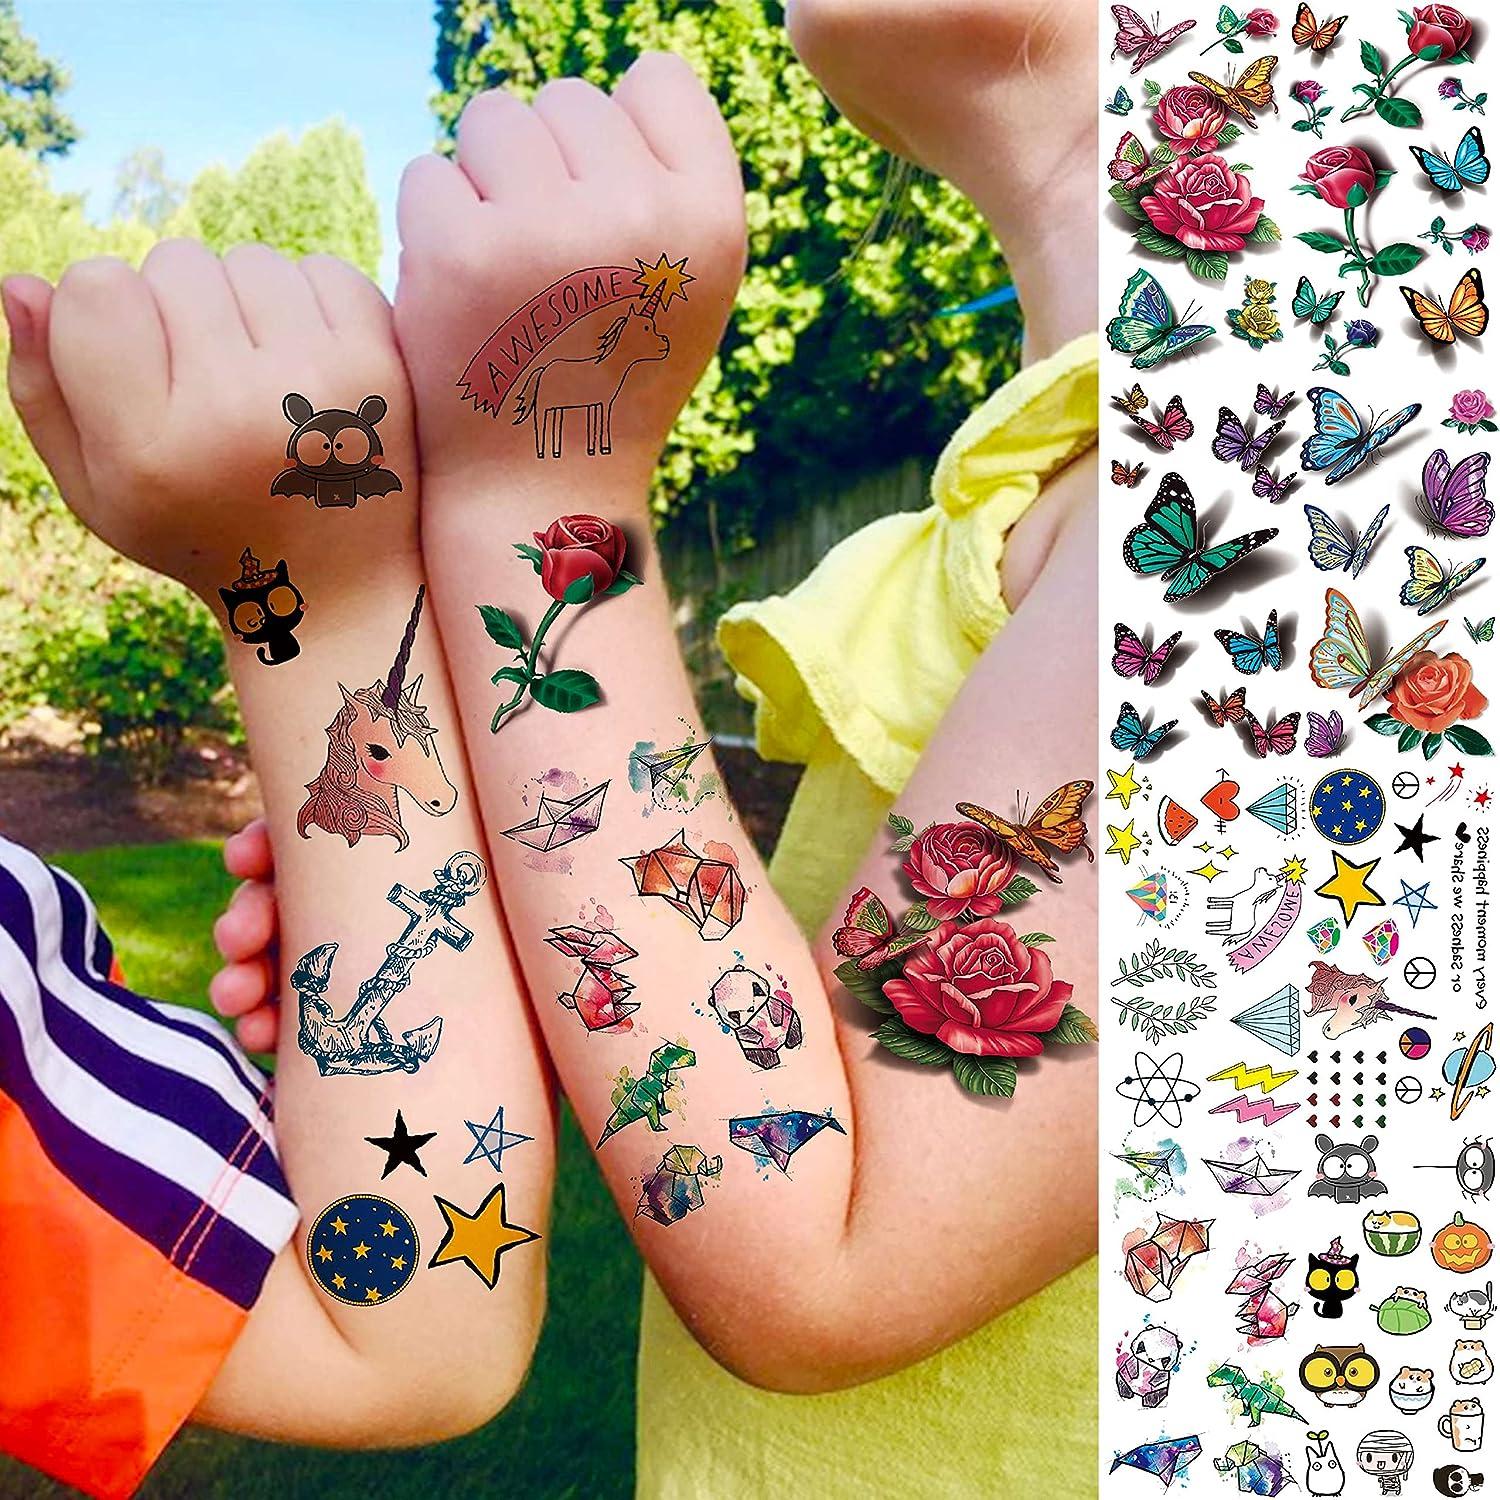 32 Sheets Watercolor Flowers Temporary Tattoos Stickers, Roses, Butterflies  Multi-Colored Mixed Style Temporary Tattoos, Waterproof Fake Tattoo  Stickers Birthday Party Supplies, Party Favors for Women price in UAE |  Amazon UAE | kanbkam